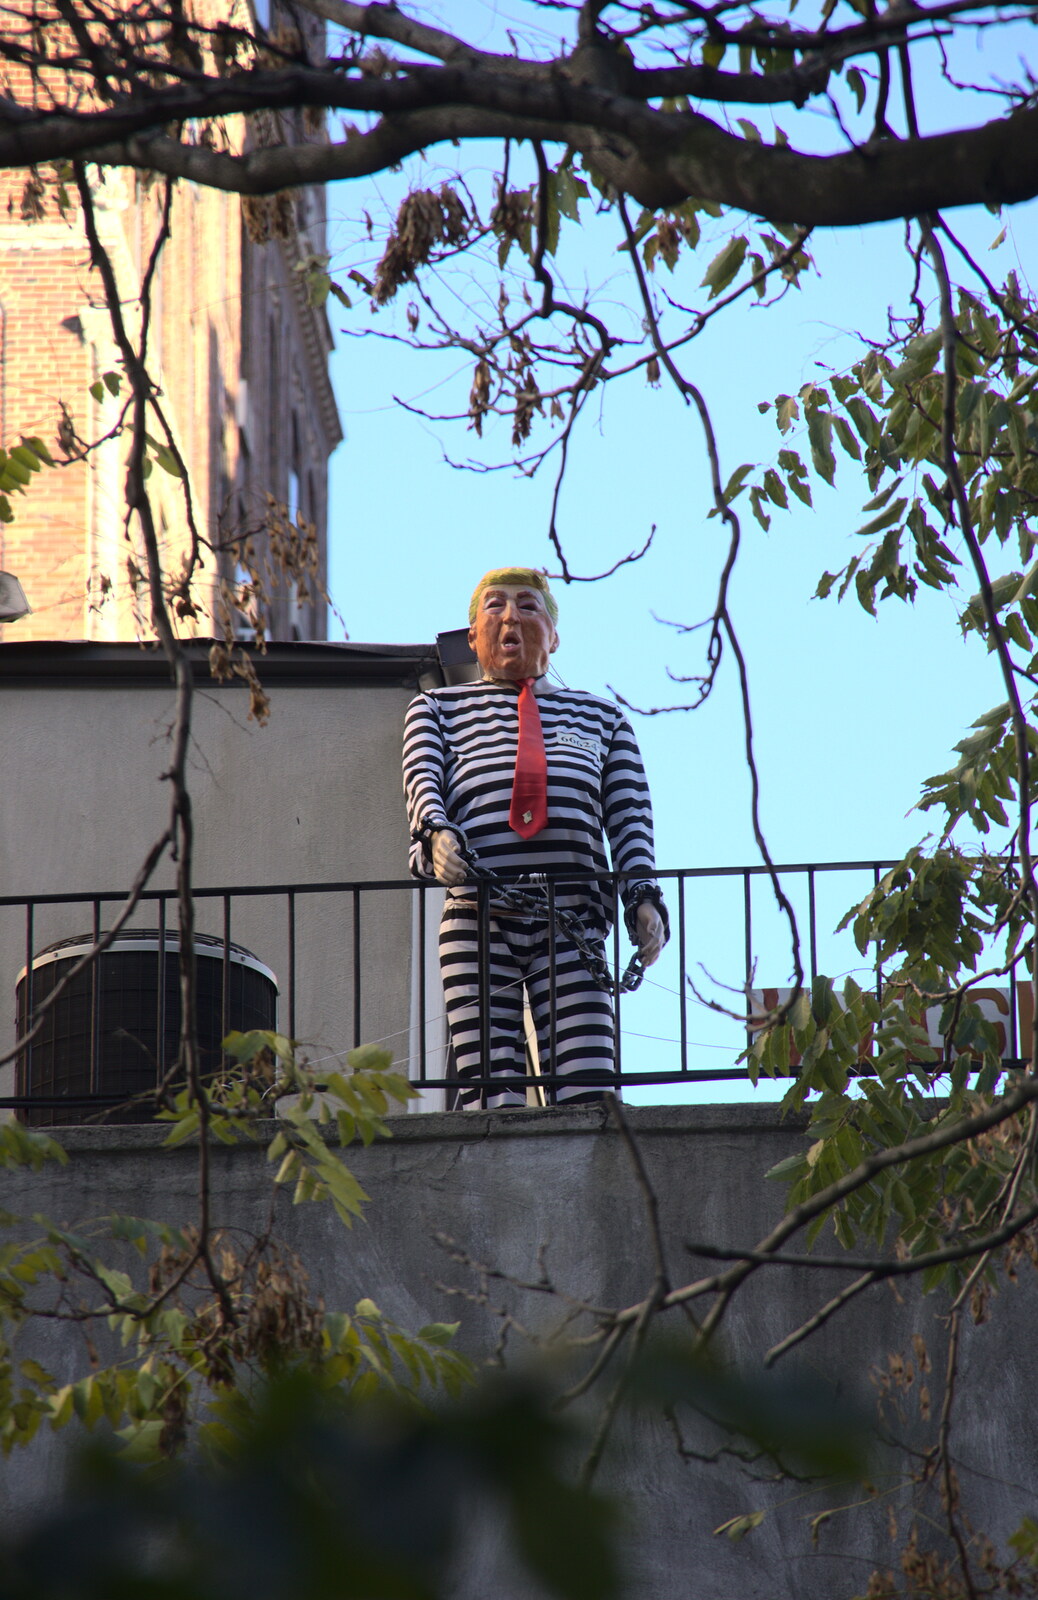 A prison version of Trump from Times Square, USS Intrepid and the High Line, Manhattan, New York - 25th October 2018